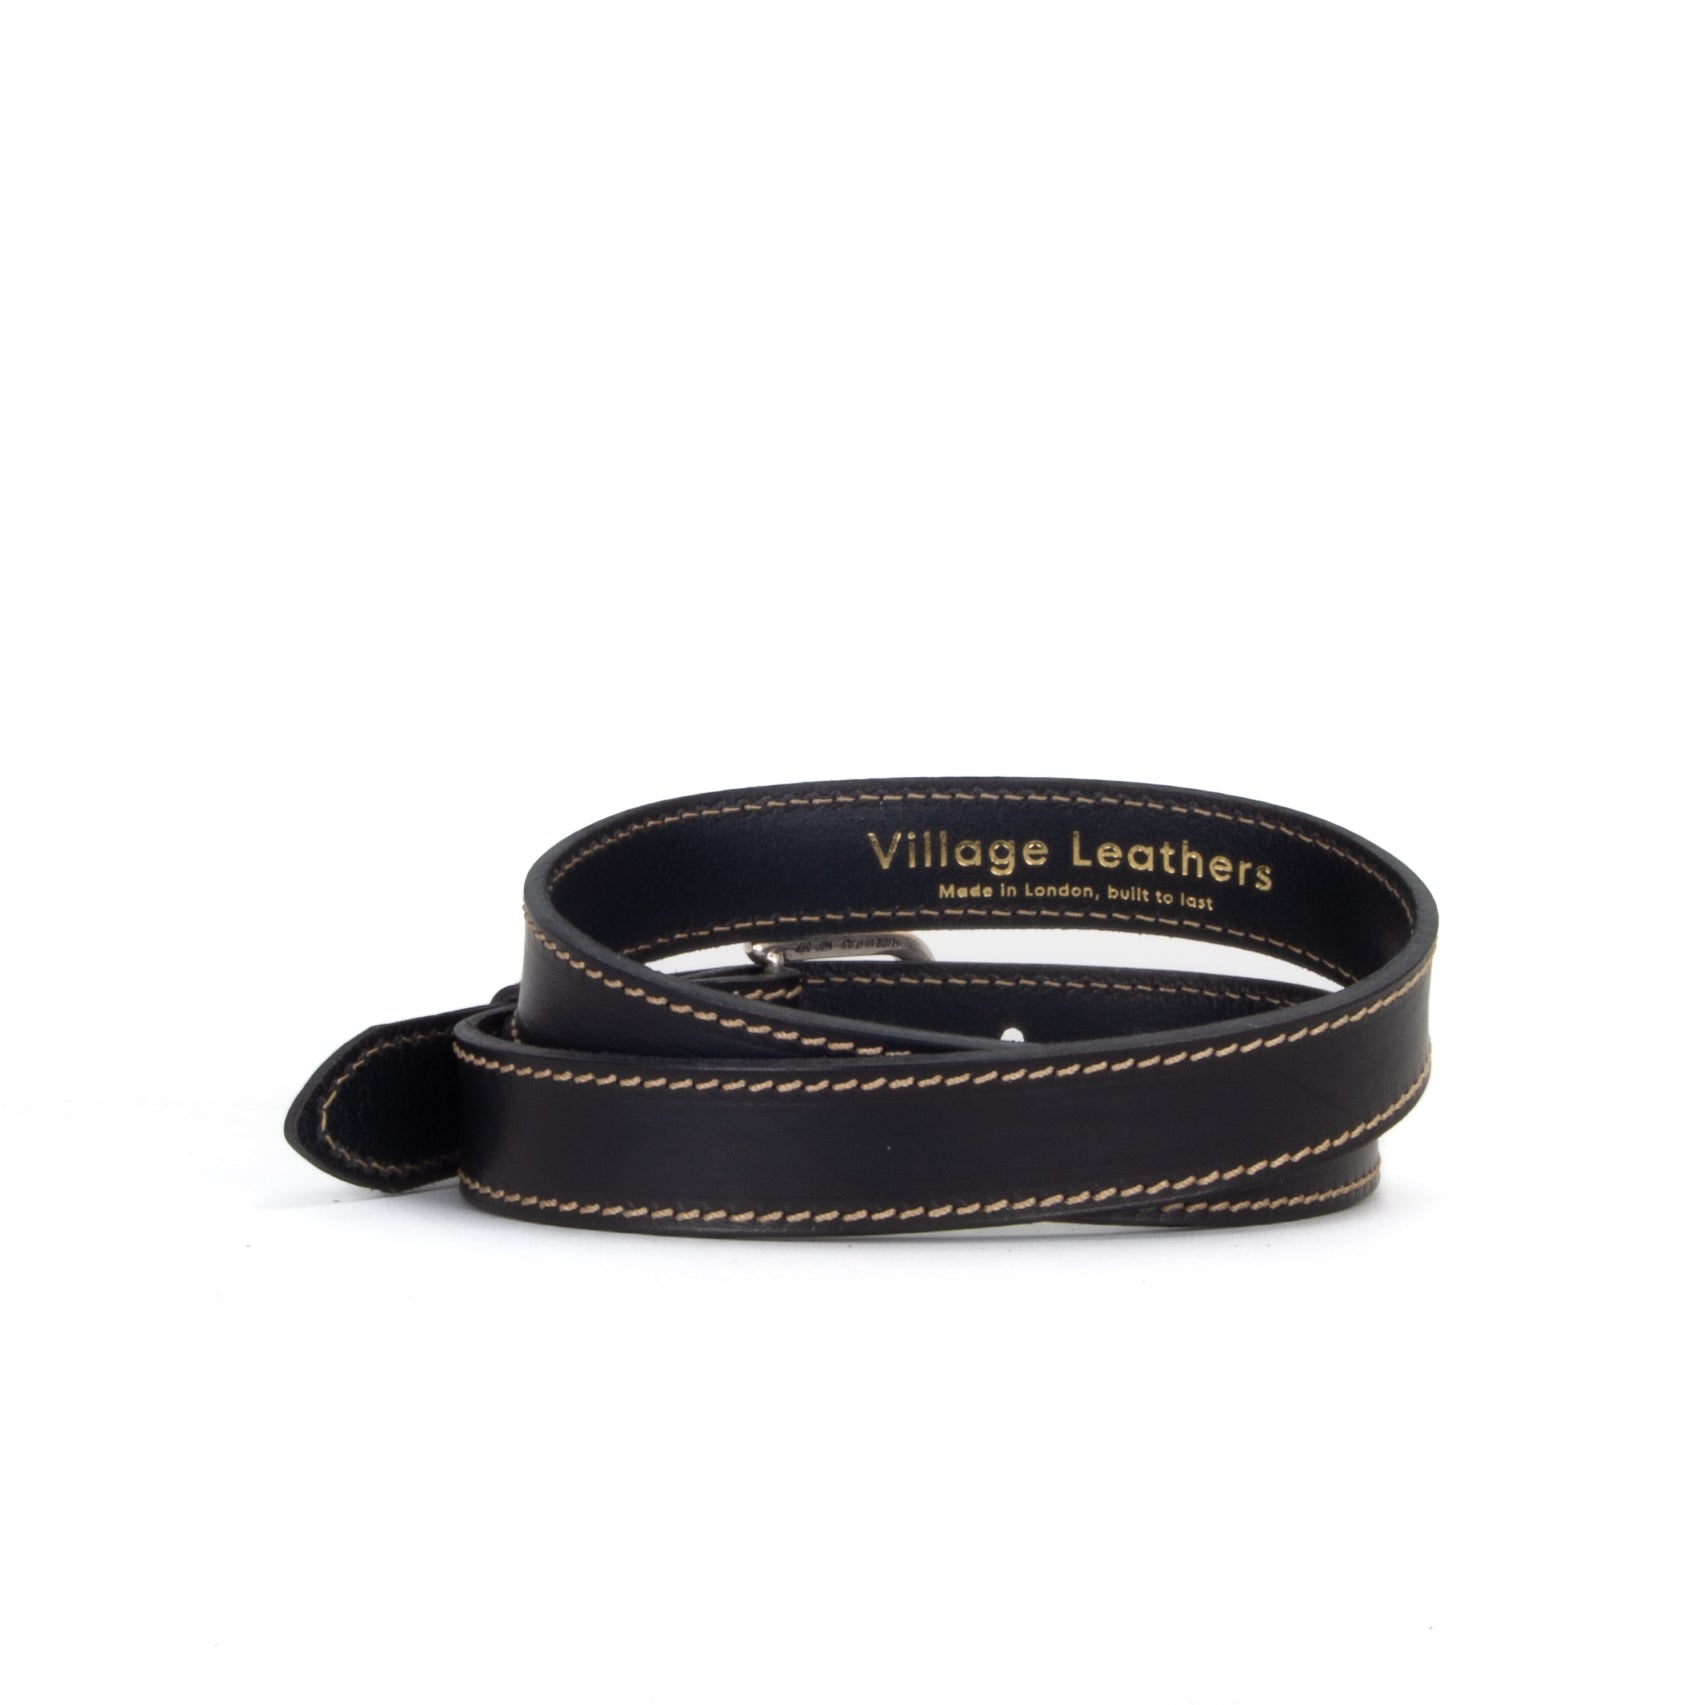 Black and Fawn 1 1/8" Stitched Leather Belt